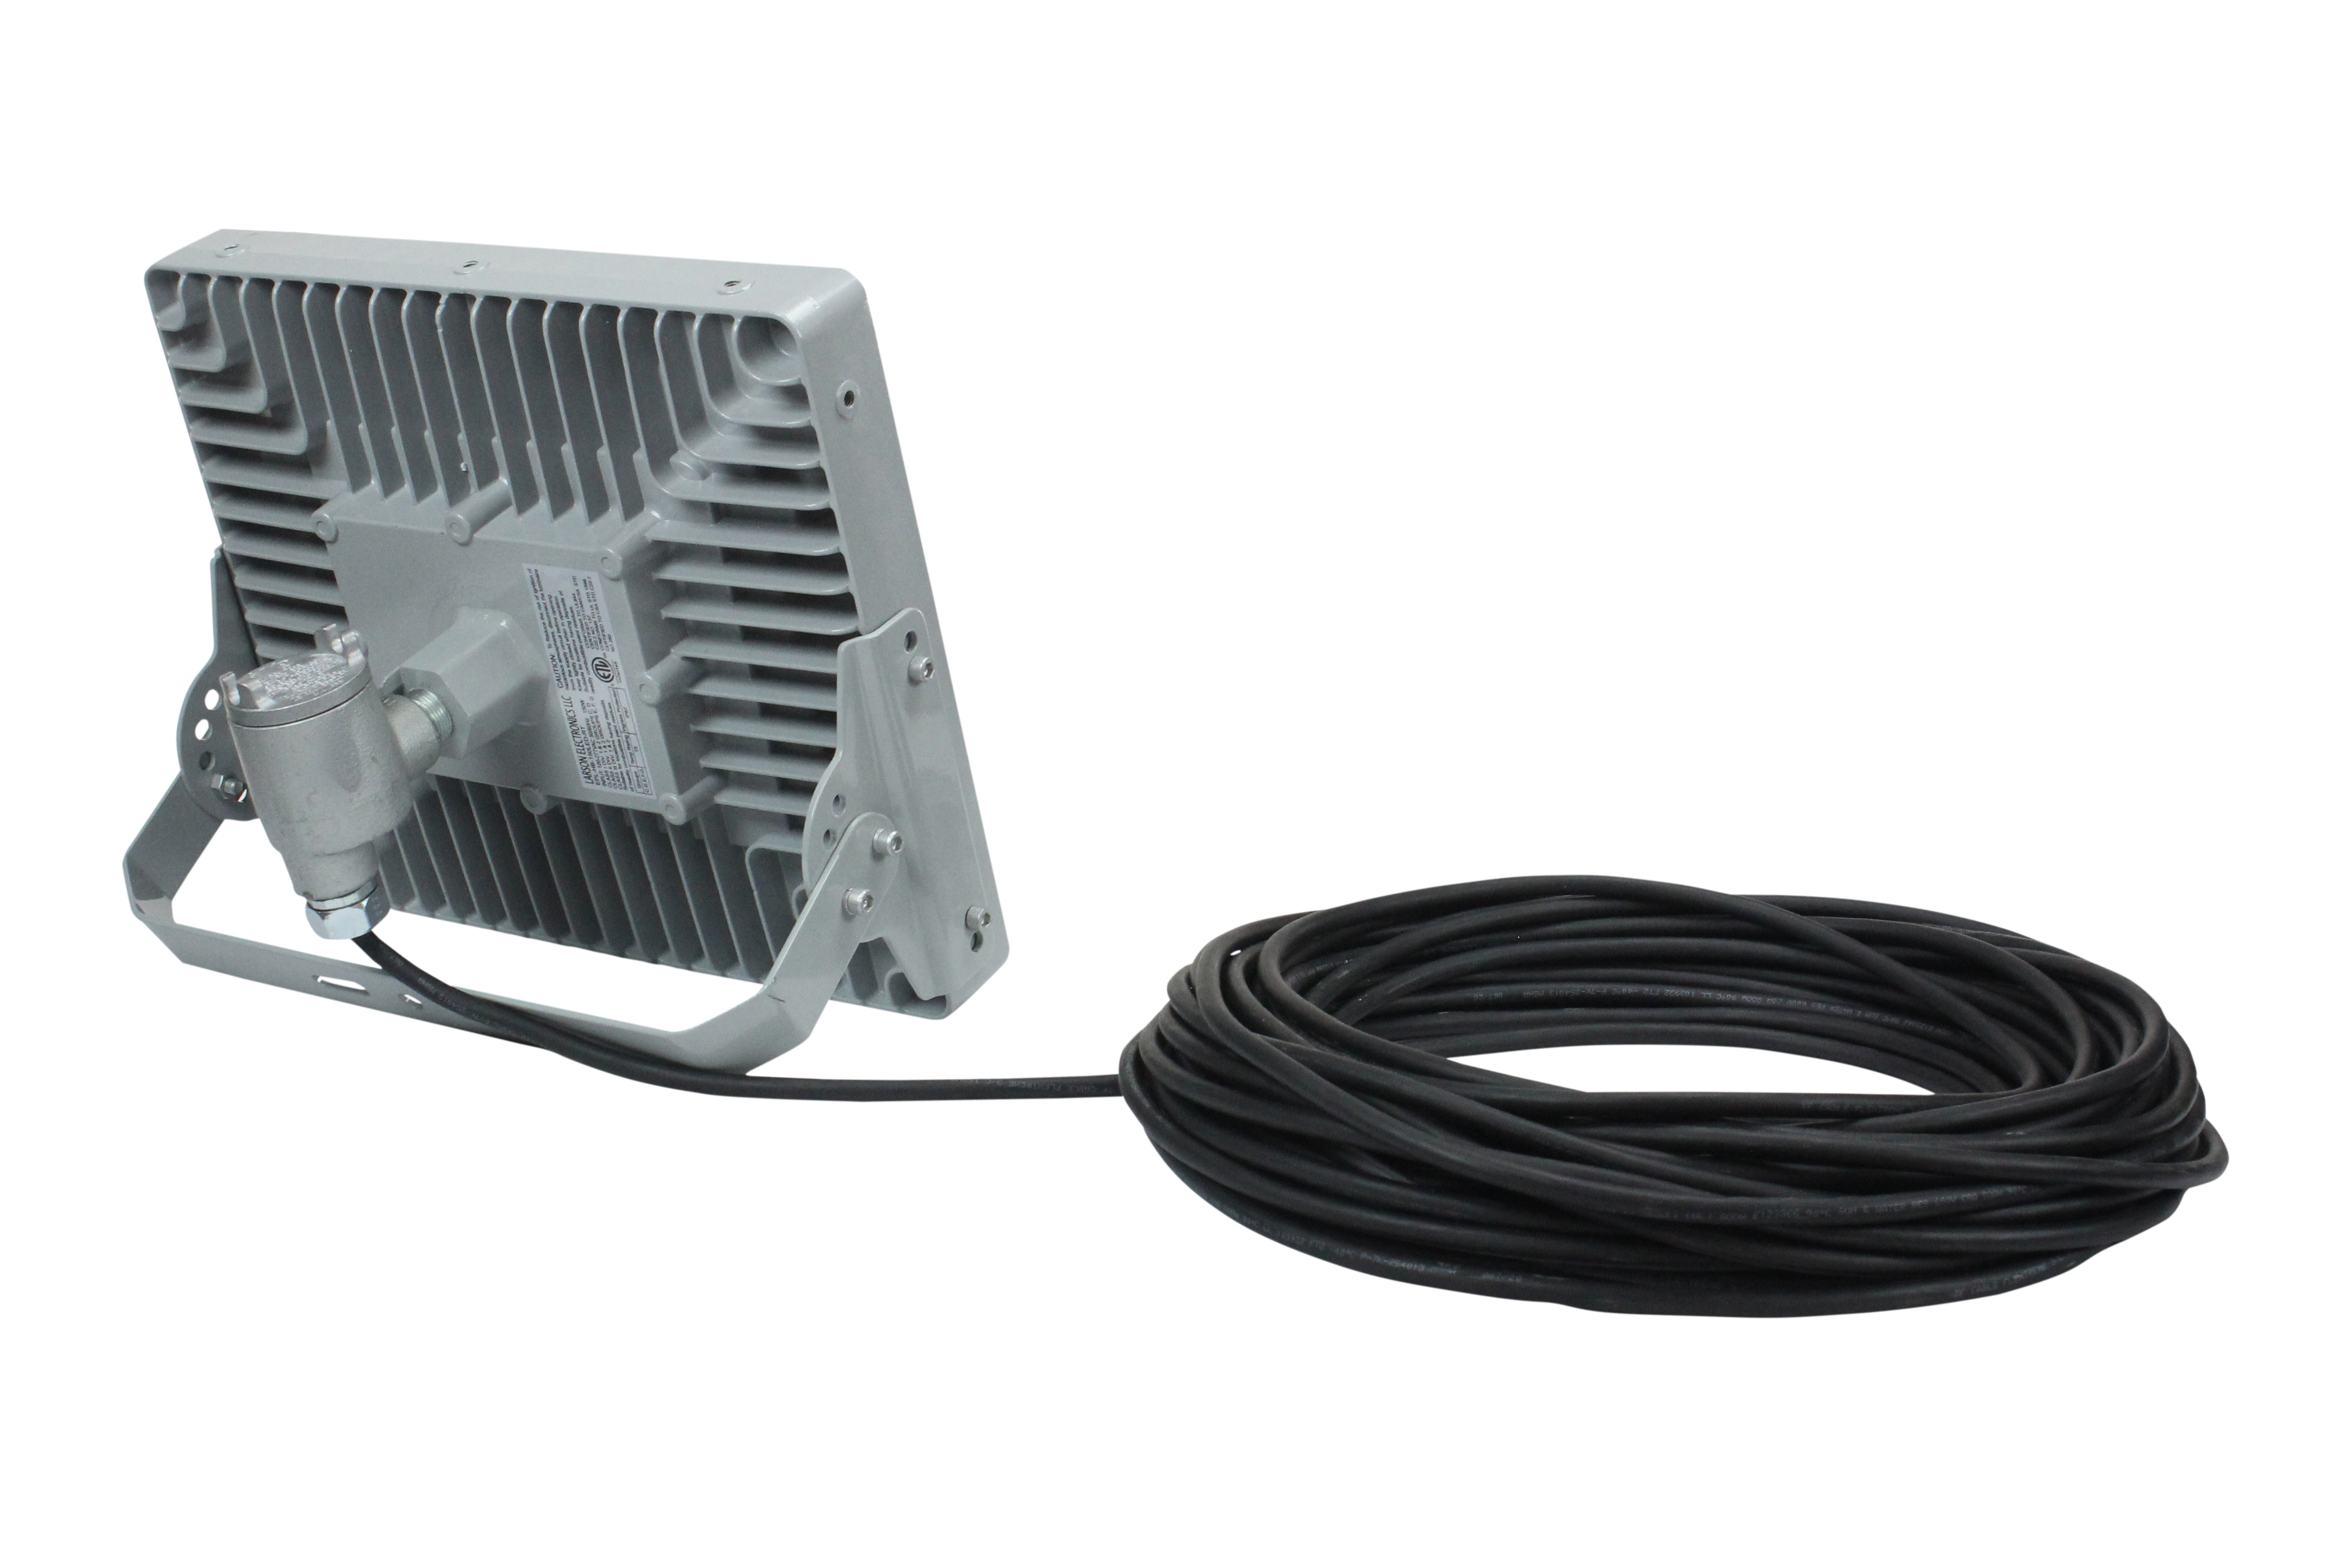 150 Watt LED Explosion Proof Light with 100' Cord Terminated in an Explosion Proof Cord Cap